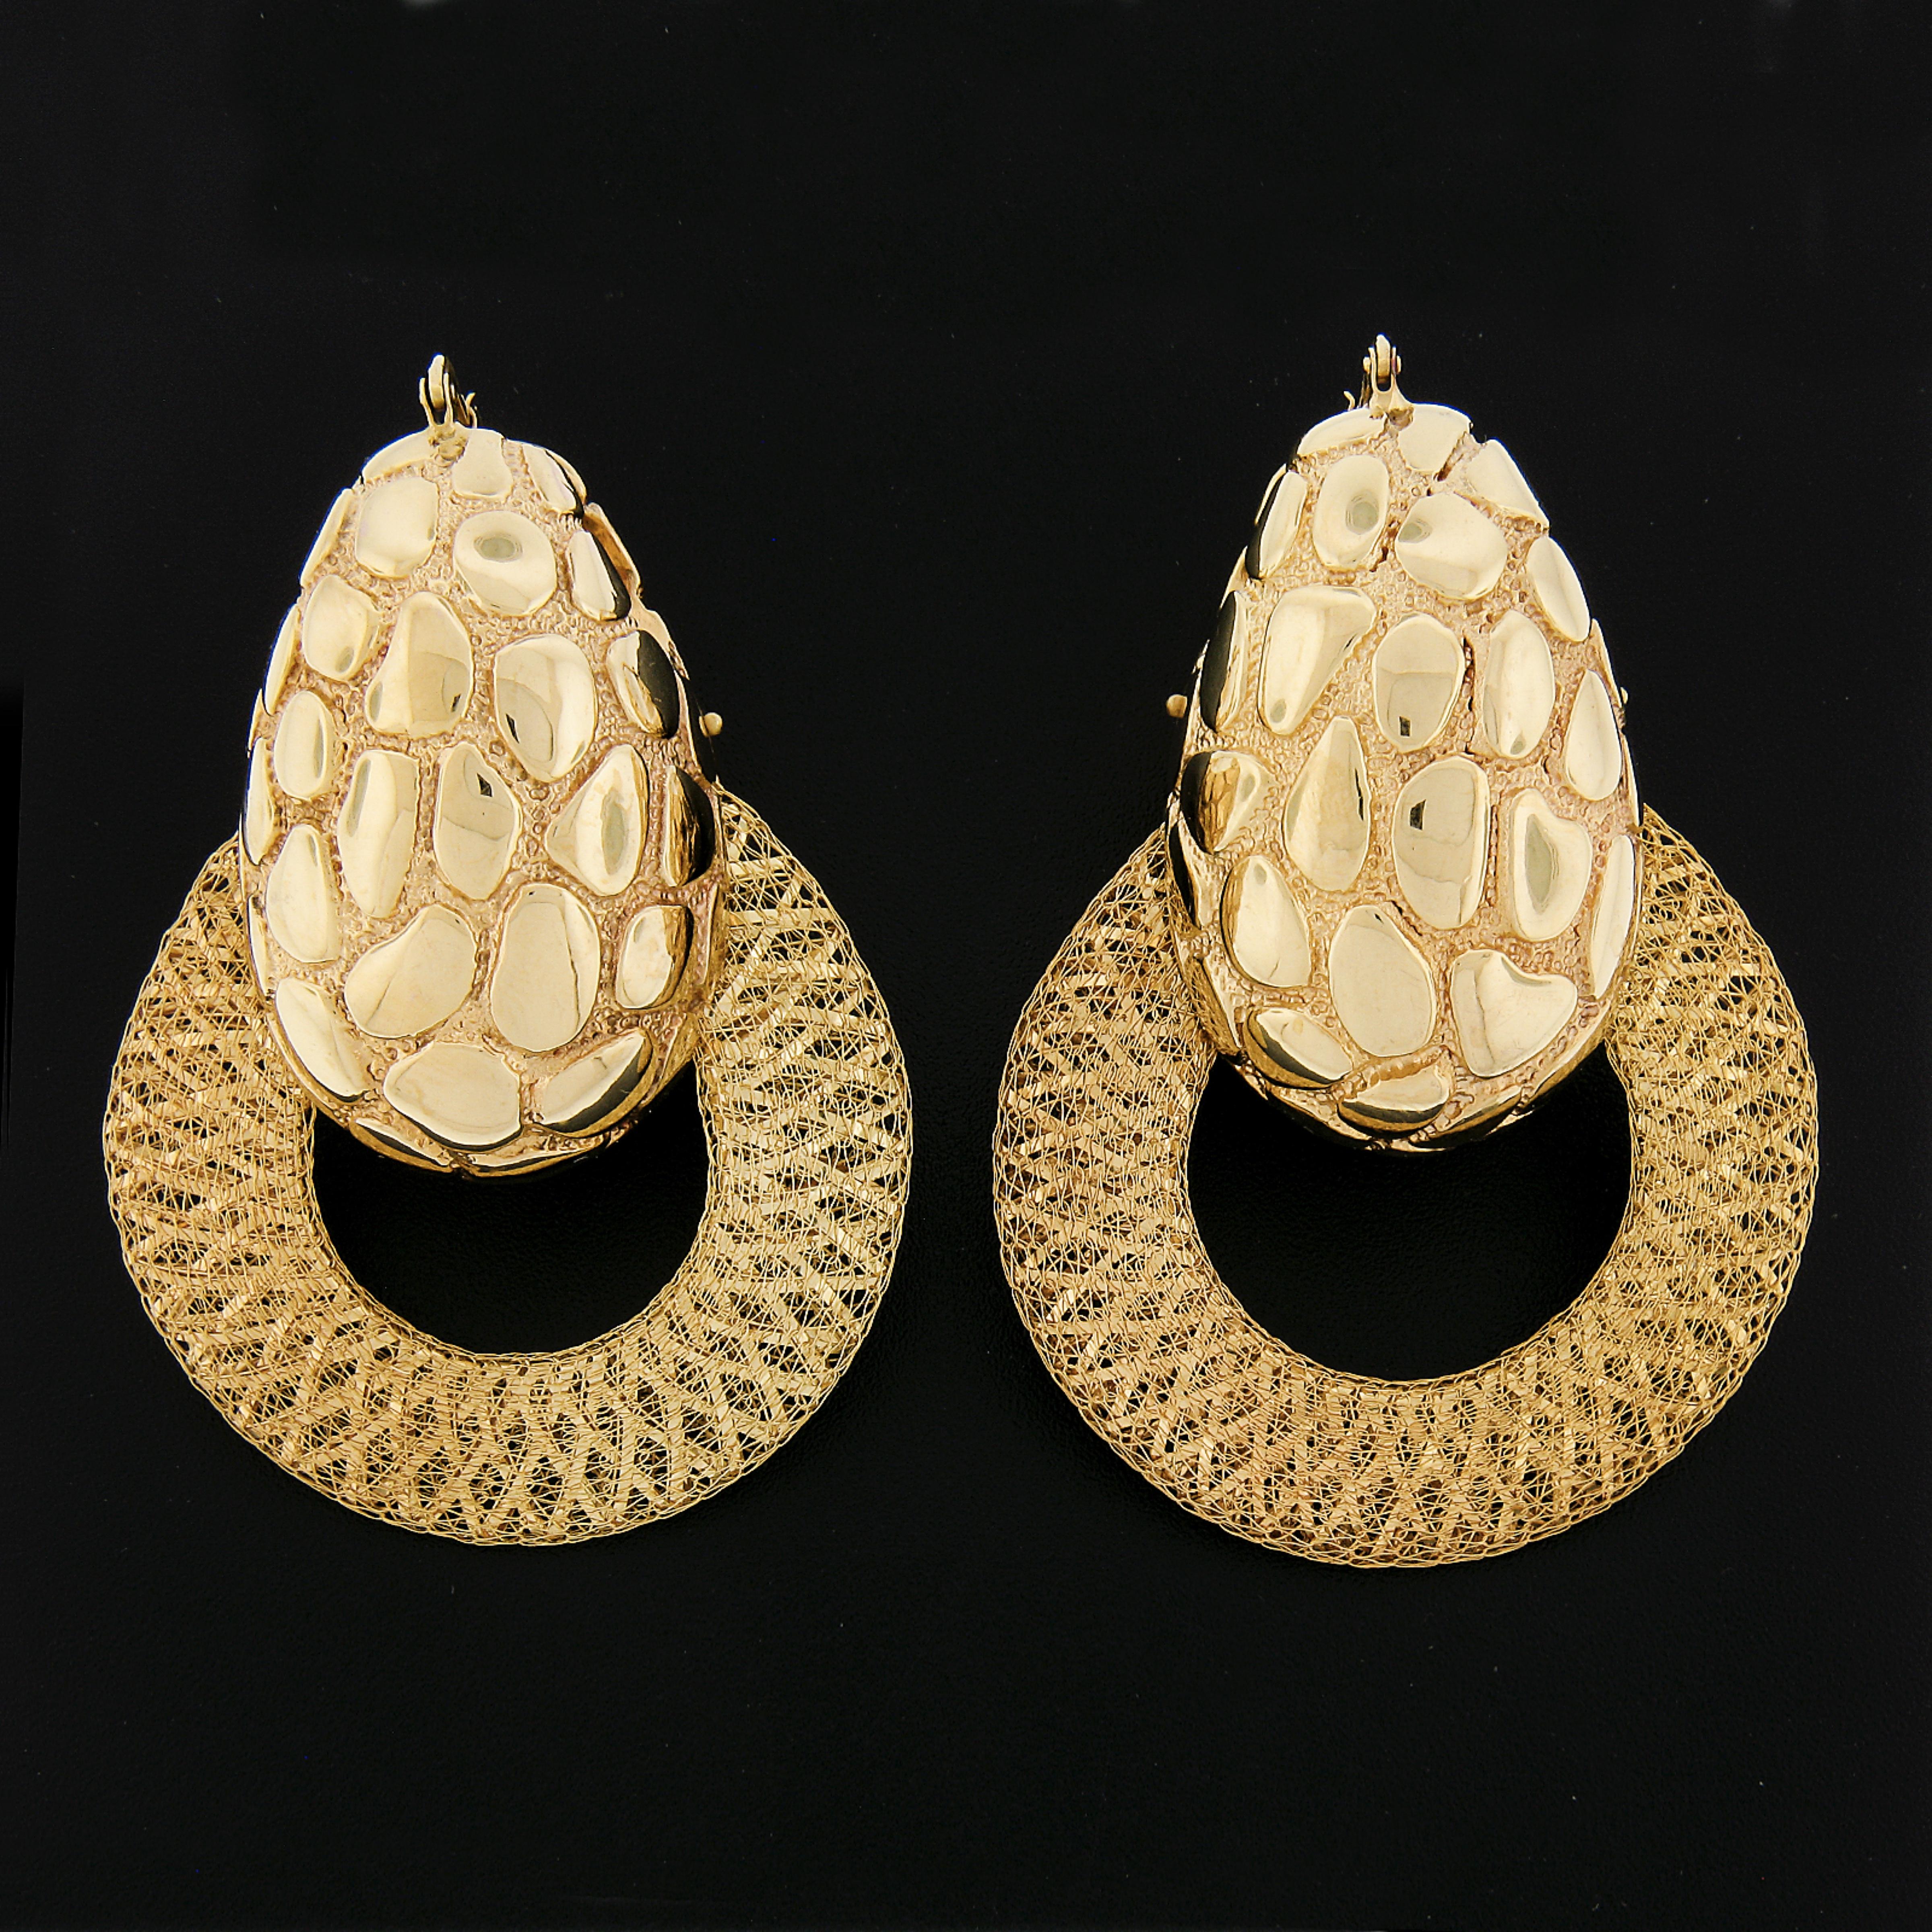 18K Yellow Gold Large Puffed Electroform w/ Woven Mesh Ring Dangle Snap Earrings In Excellent Condition For Sale In Montclair, NJ